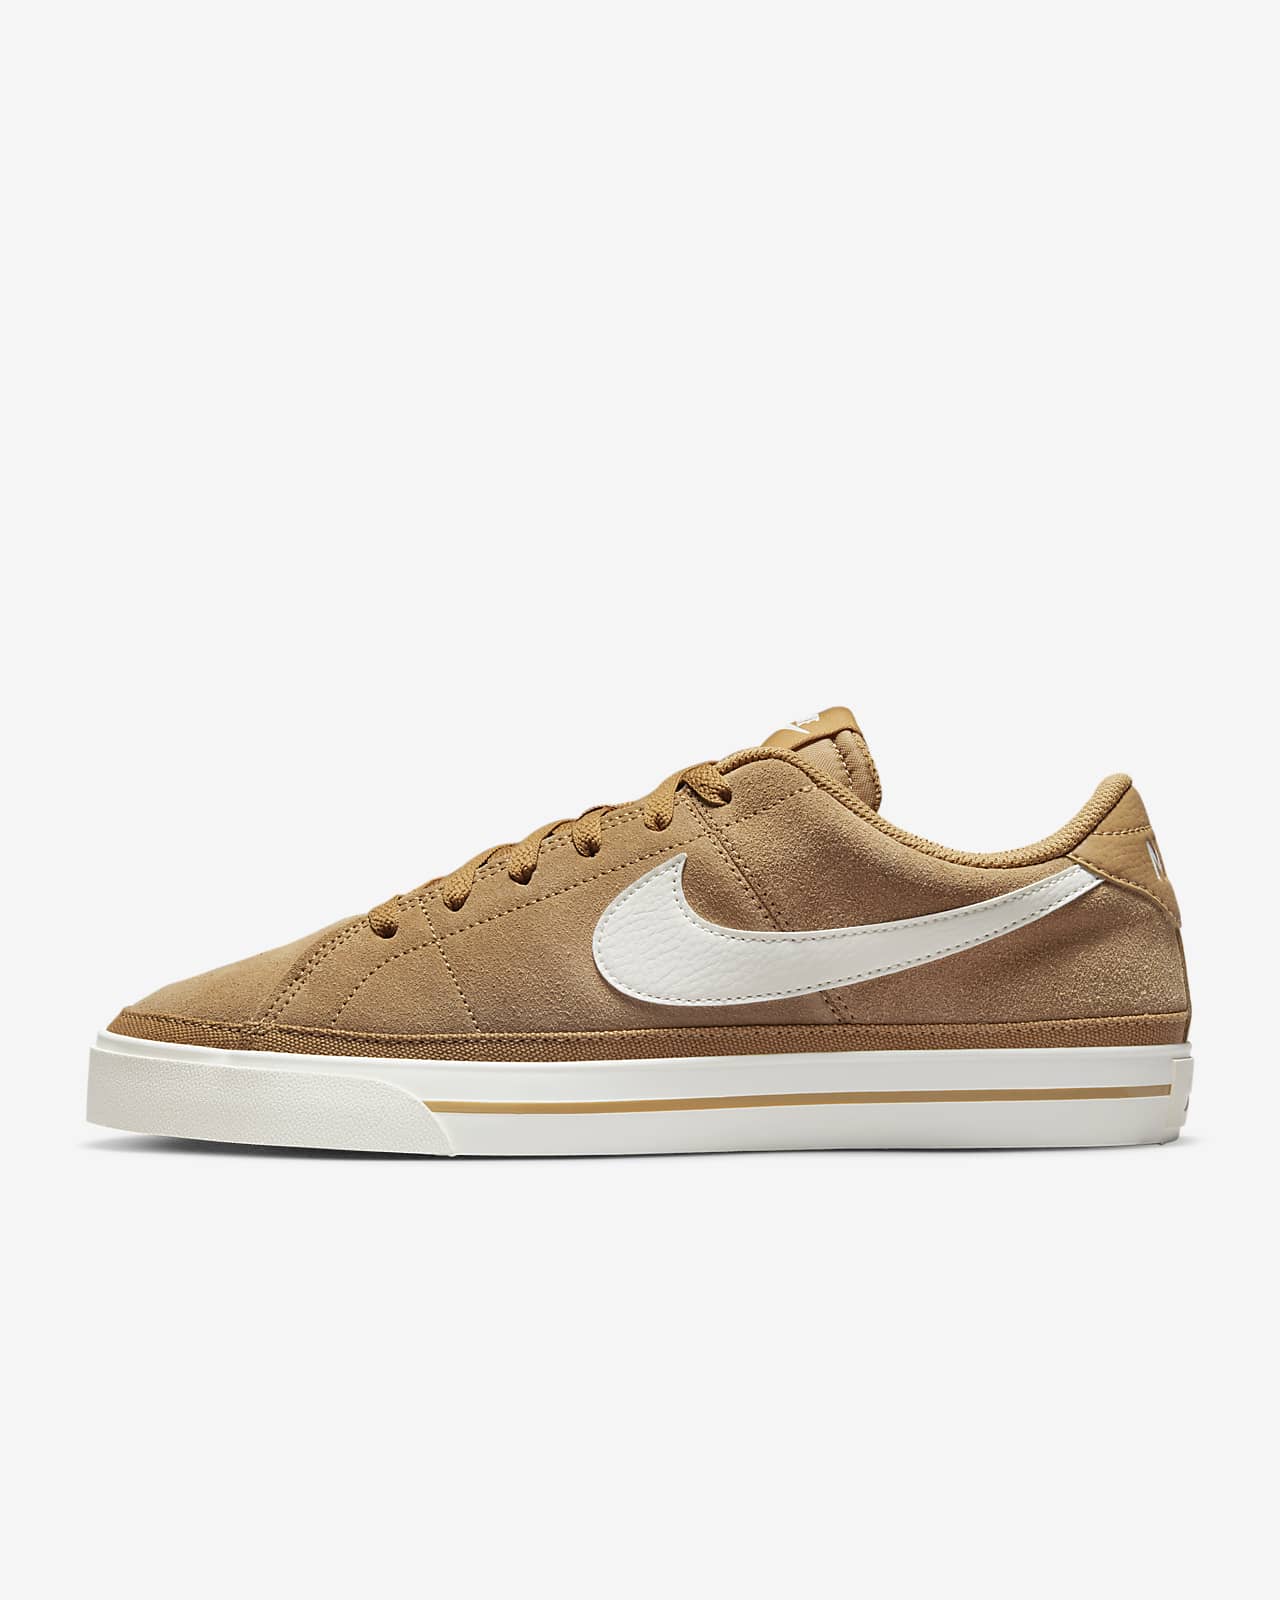 NikeCourt Legacy Suede Men's Shoes. Nike VN